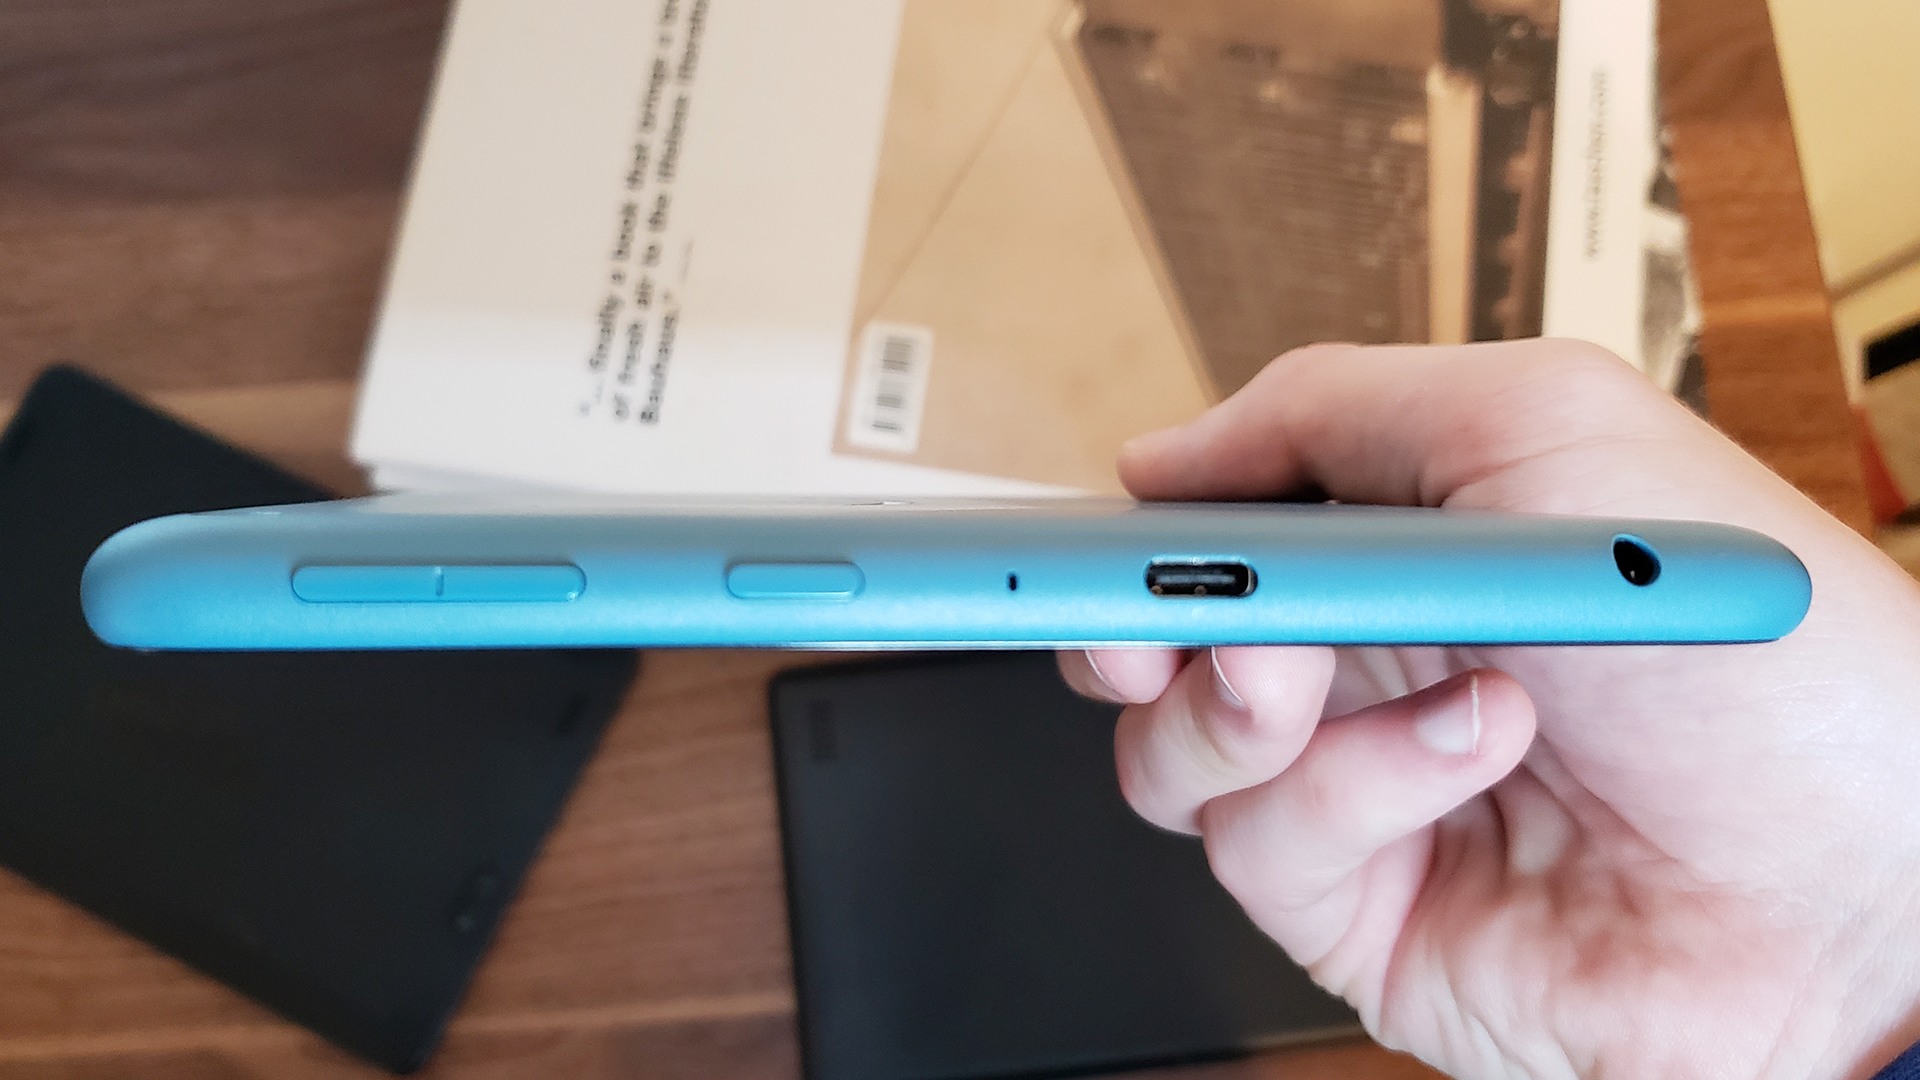 A photo of the Fire HD 8's USB-C port, aux port, volume controls and power button.